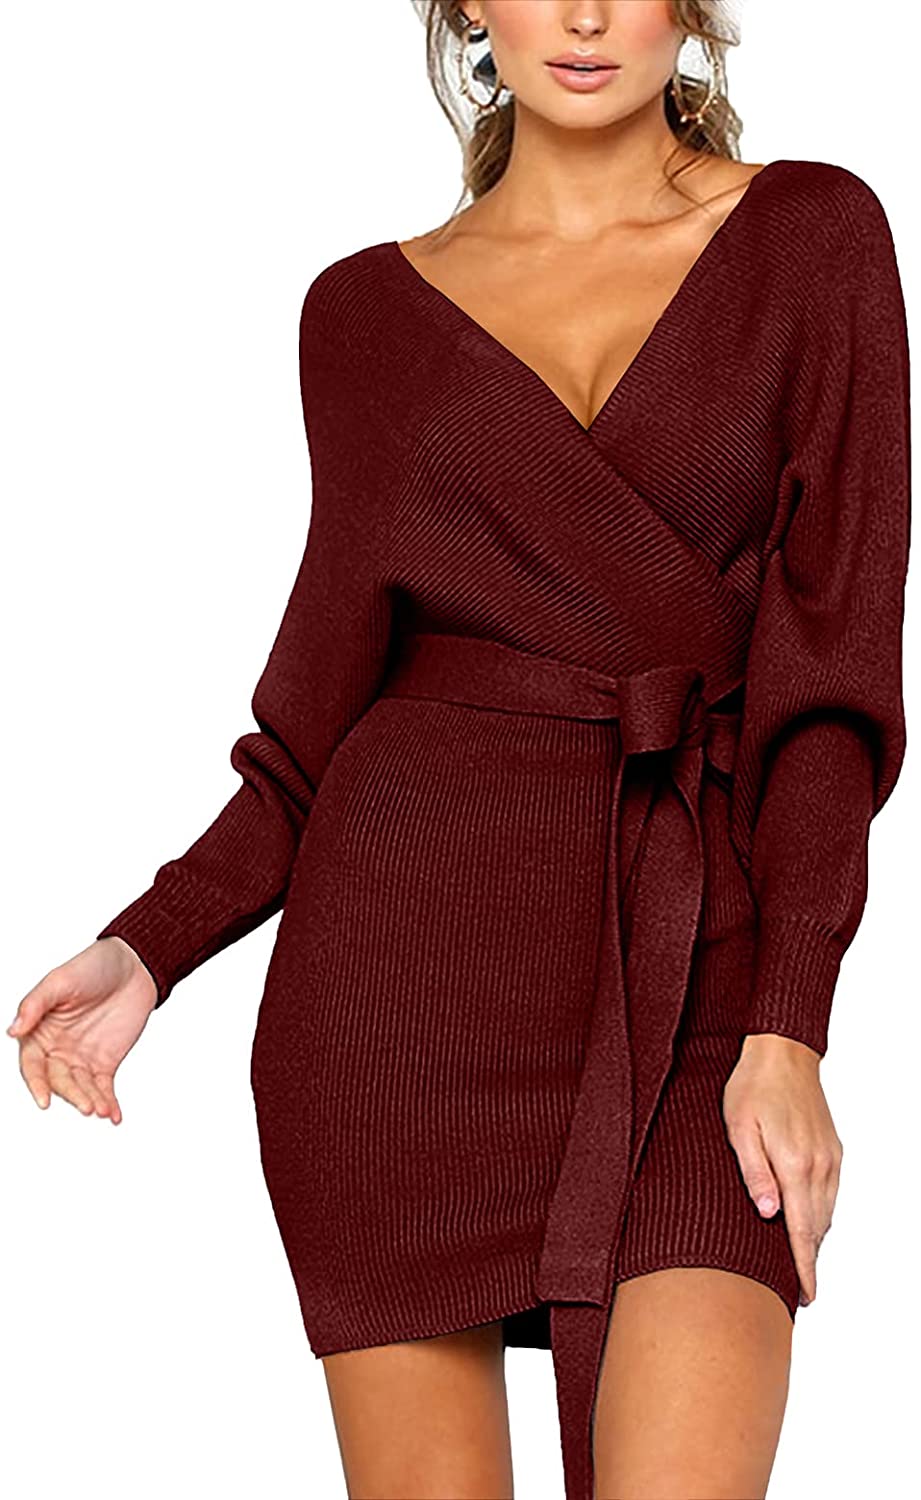 CHERFLY Women's V Neck Sweater Dresses Batwing Long Sleeve Backless Bodycon Dress with Belt